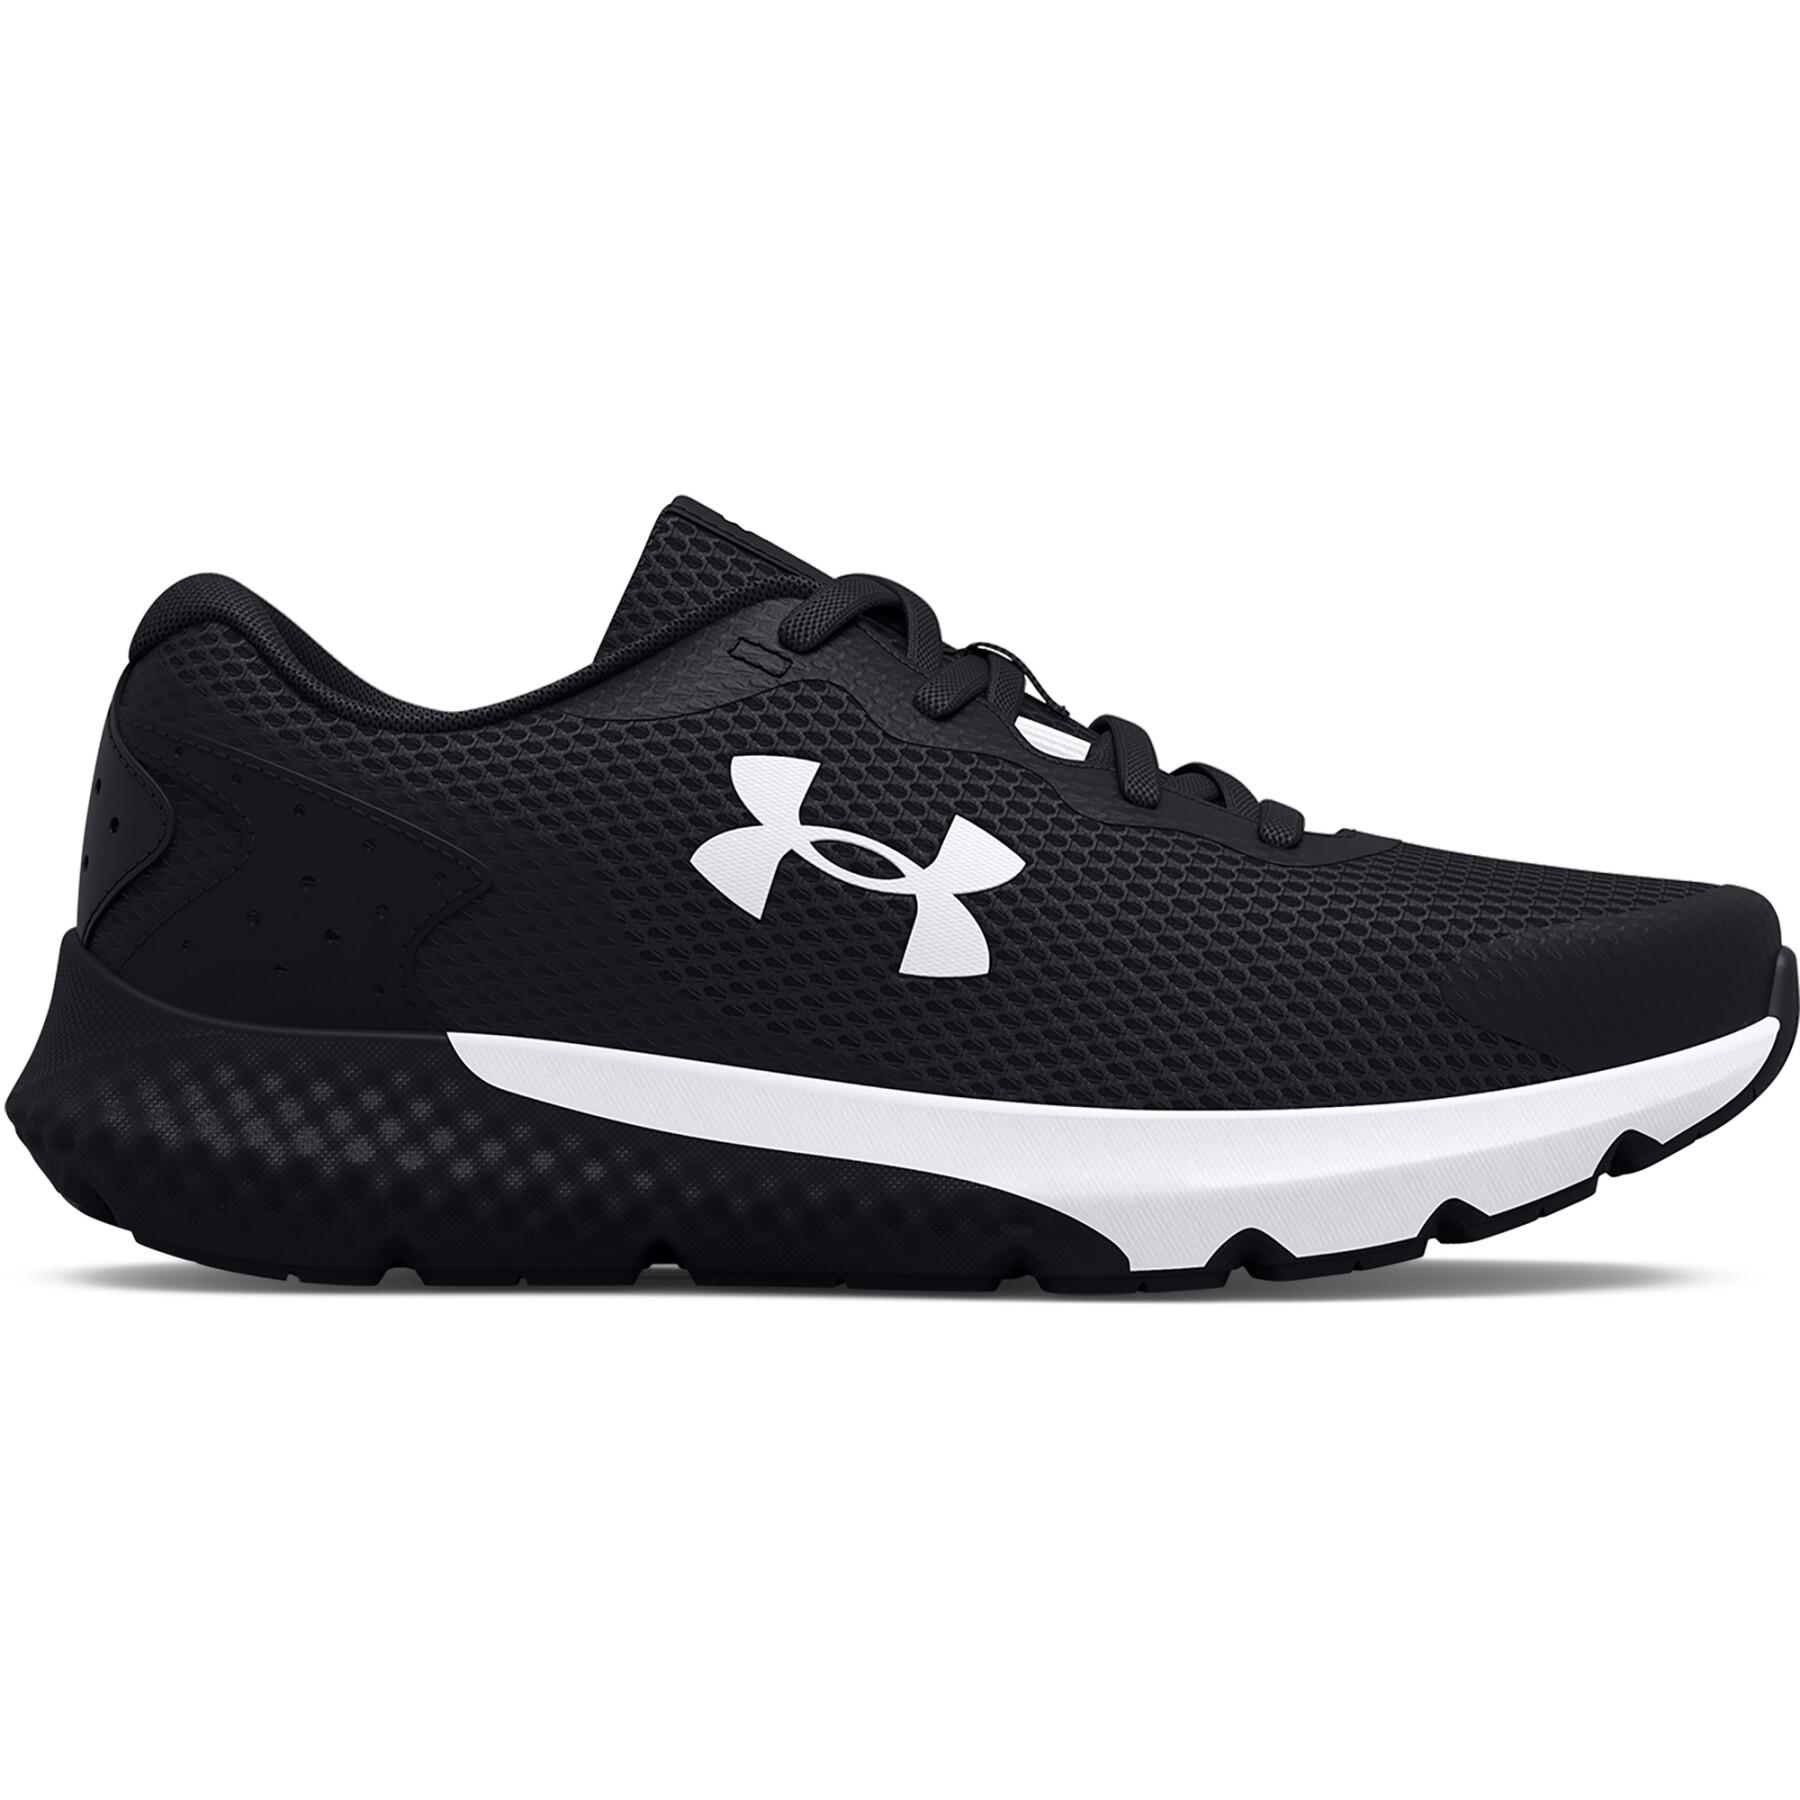 Running shoes enfant Under Armour BPS Rogue 3 AC